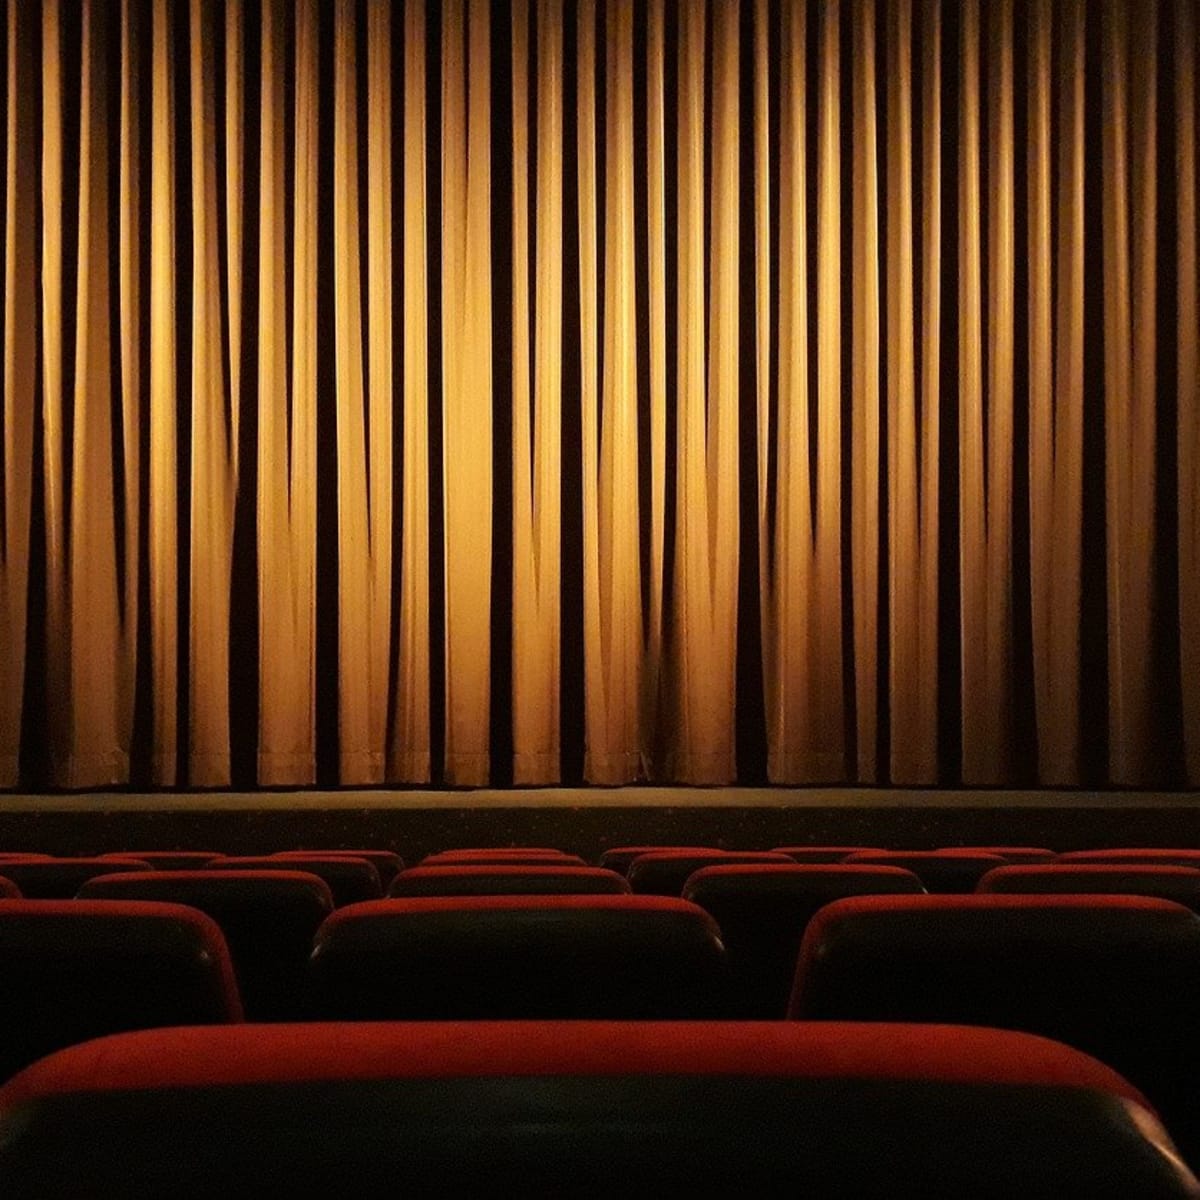 Starting At 99 You Can Now Rent Out An Amc Movie Theater For A Private Party - Bring Me The News